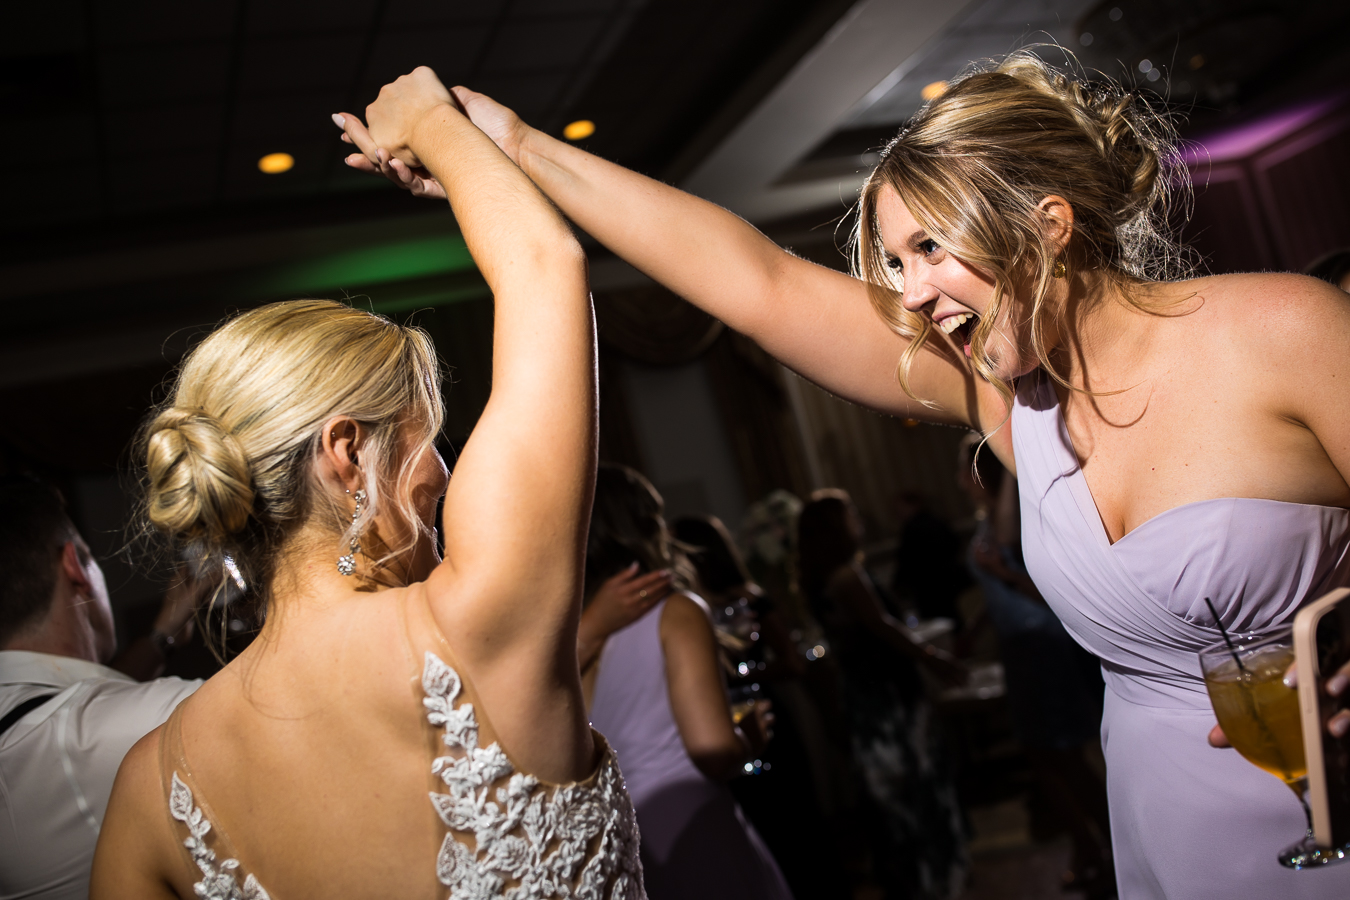 best pa wedding photographer, lisa rhinehart, captures this image of the bride holding hands with a bridesmaid as they dance together 